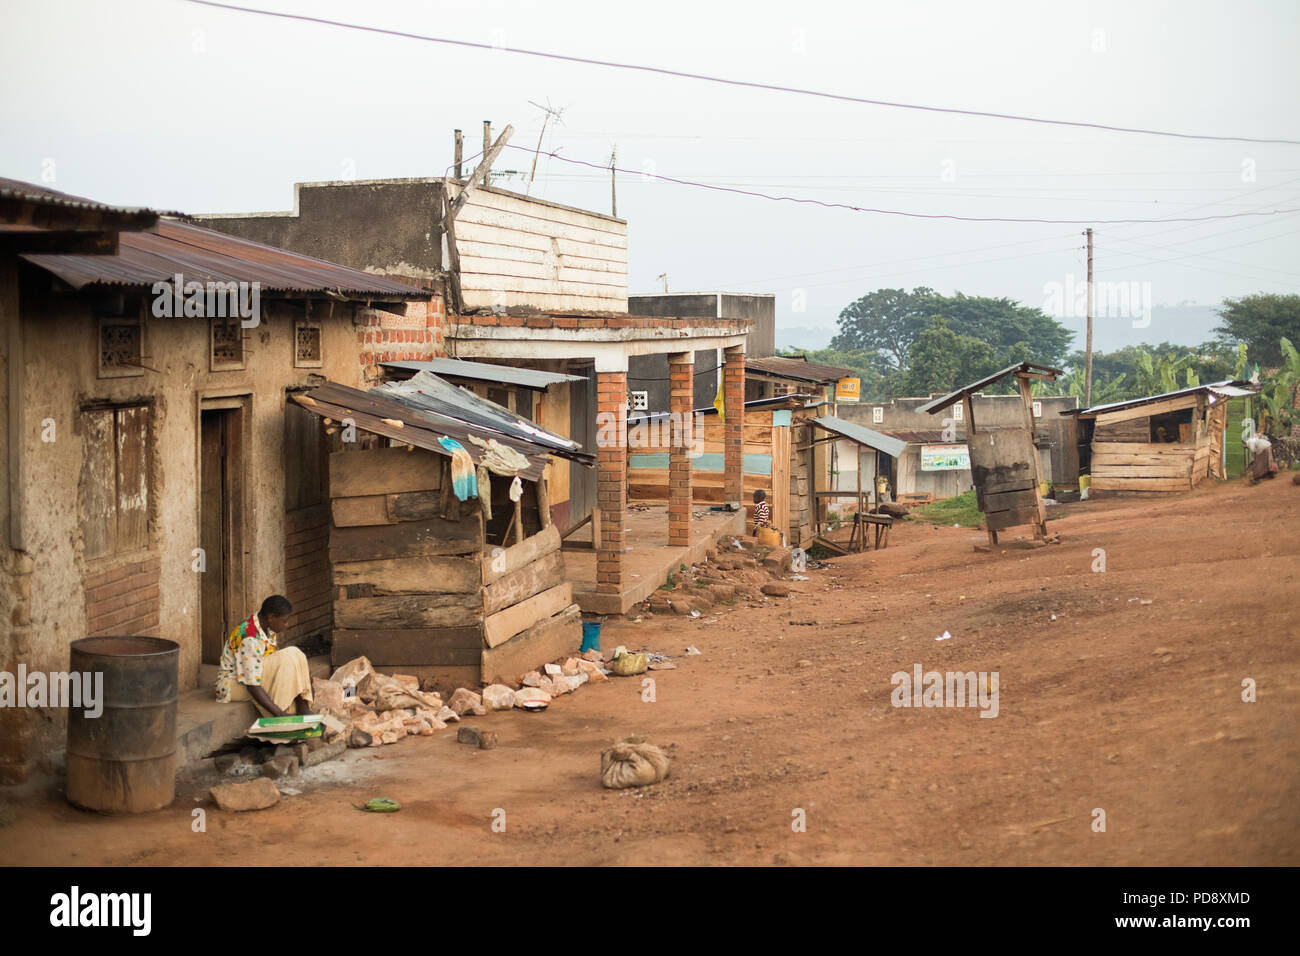 Shops and houses line the roadside of a small town in rural Mukono District, Uganda. Stock Photo